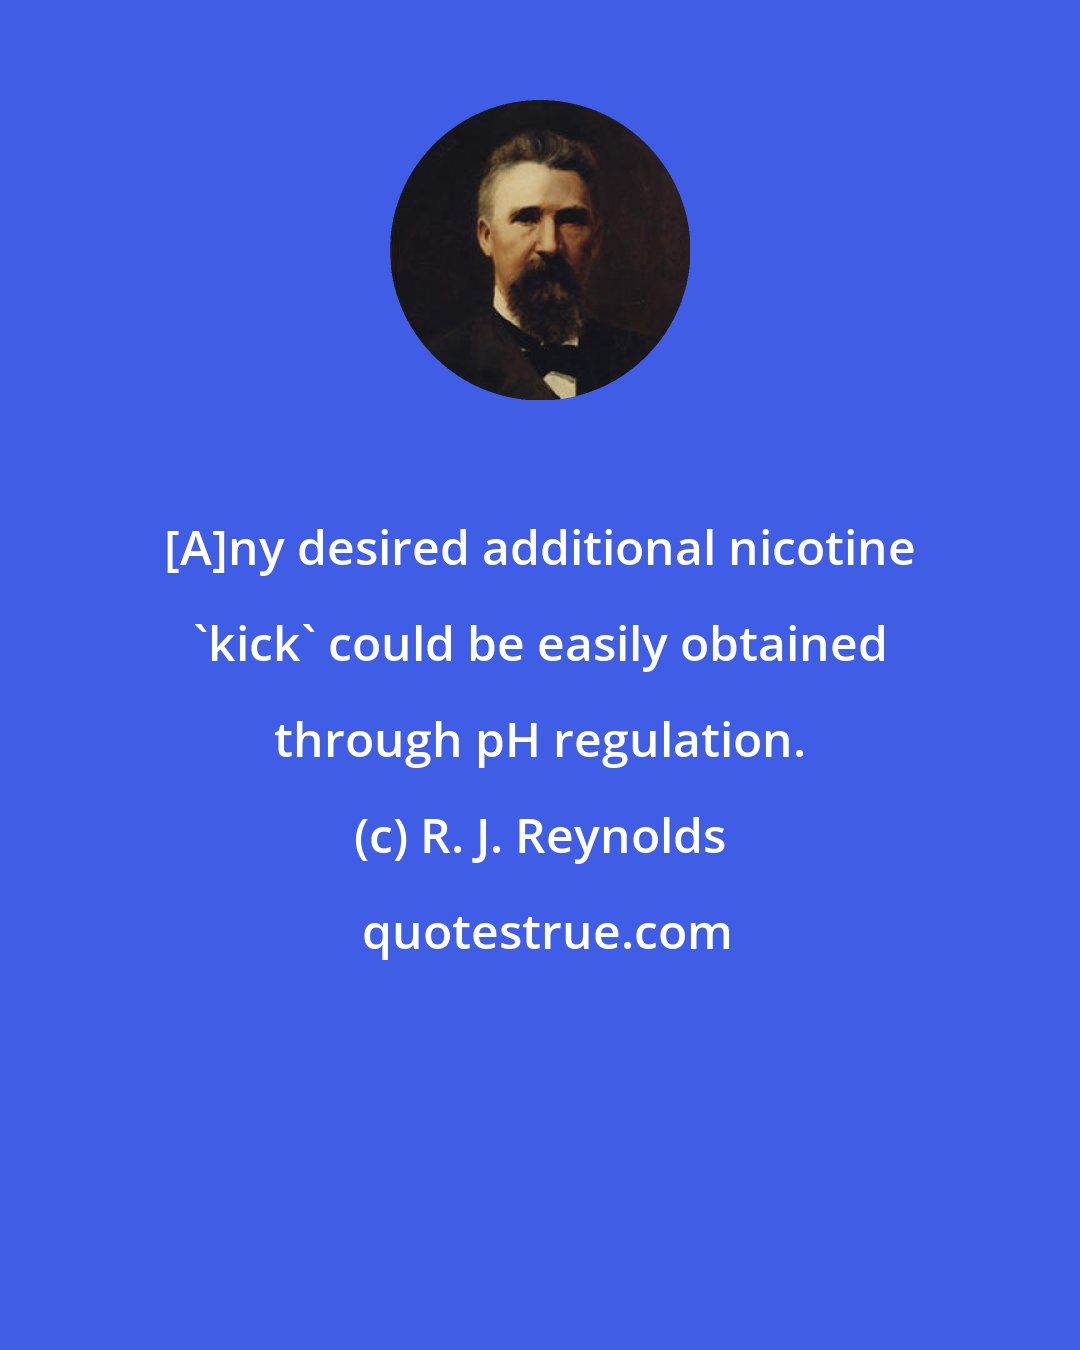 R. J. Reynolds: [A]ny desired additional nicotine 'kick' could be easily obtained through pH regulation.